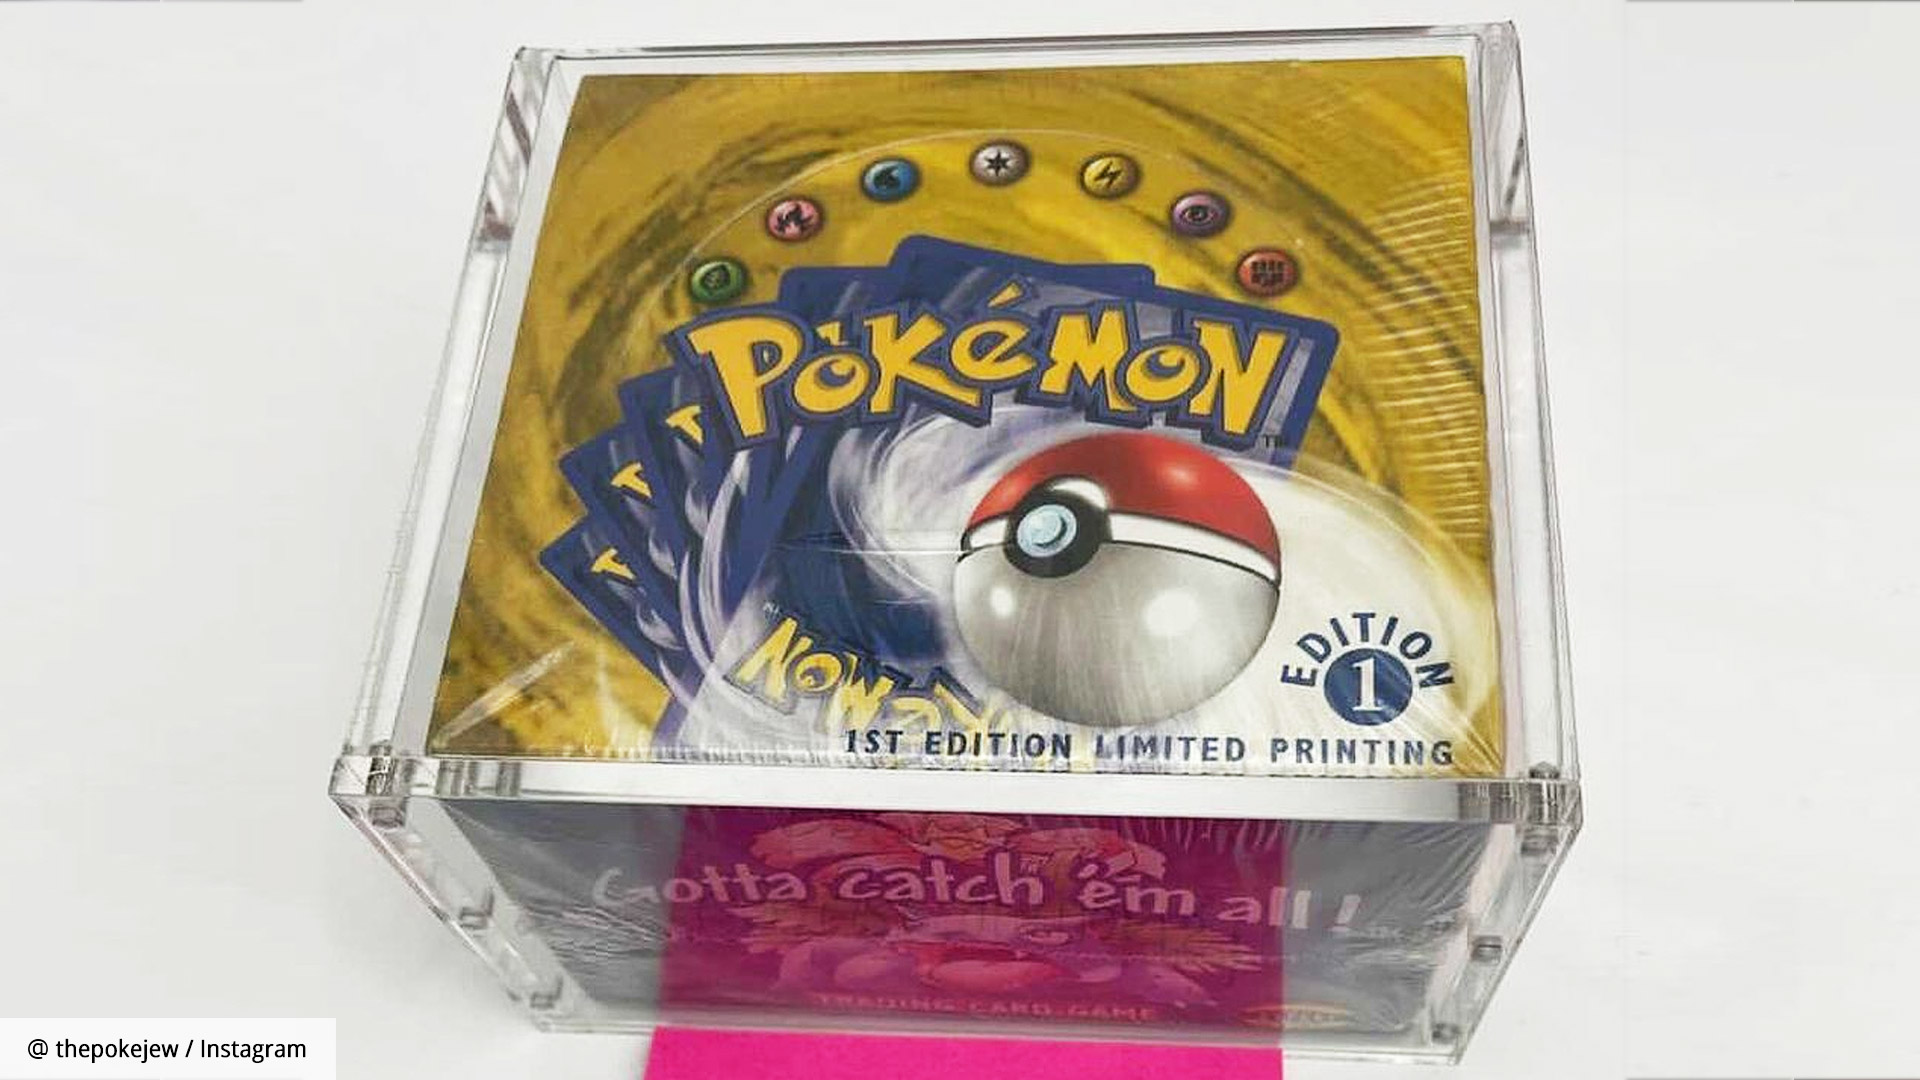 Vintage Pokémon TCG booster box sells for a record-breaking $450,000